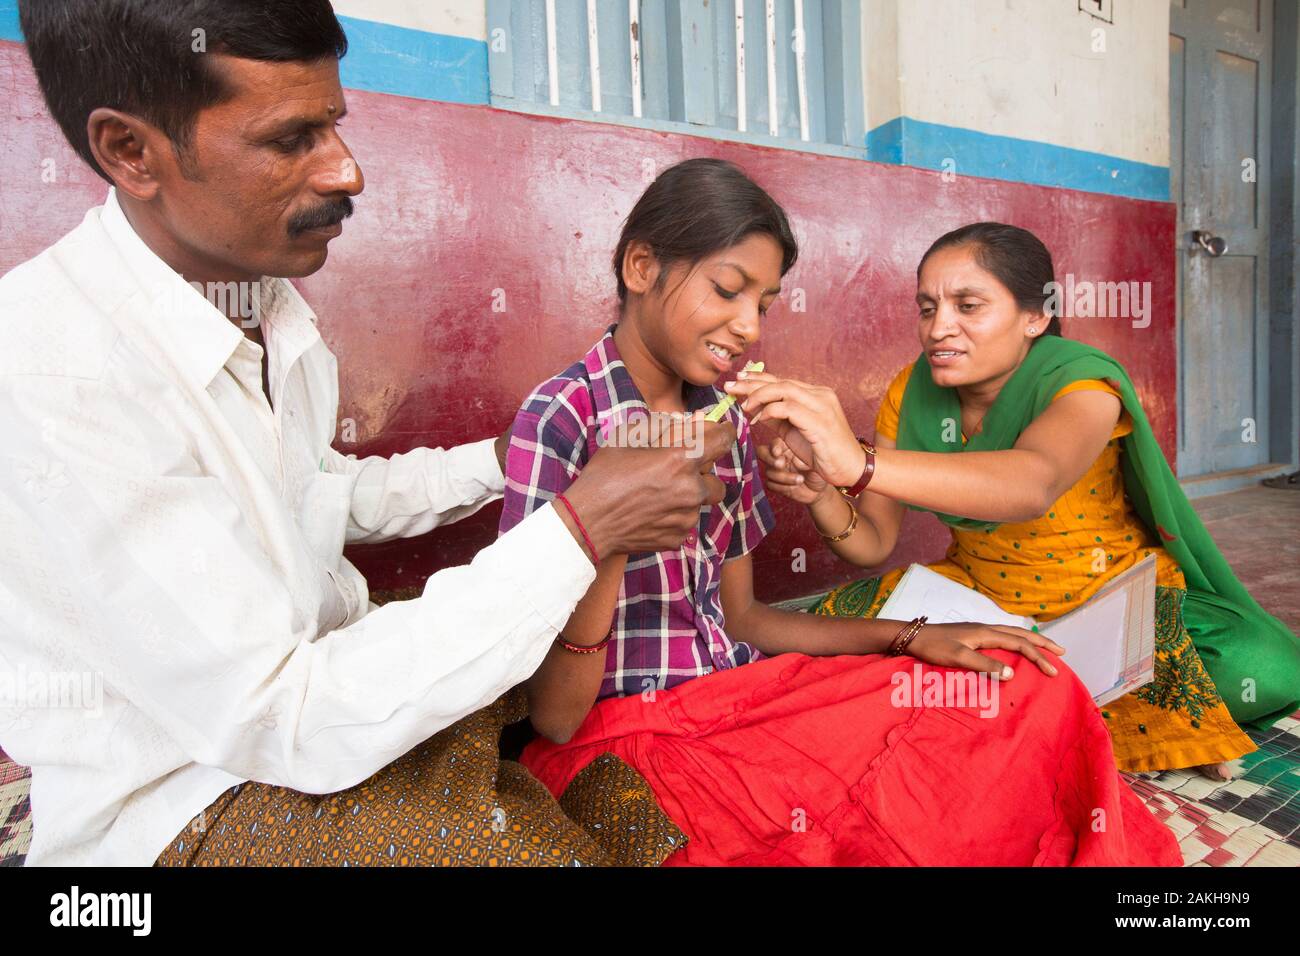 CAPTION: Madhushree has a profound learning disability. Chinnaswamy and his family are determined that in spite of this, she should be able to enjoy a Stock Photo